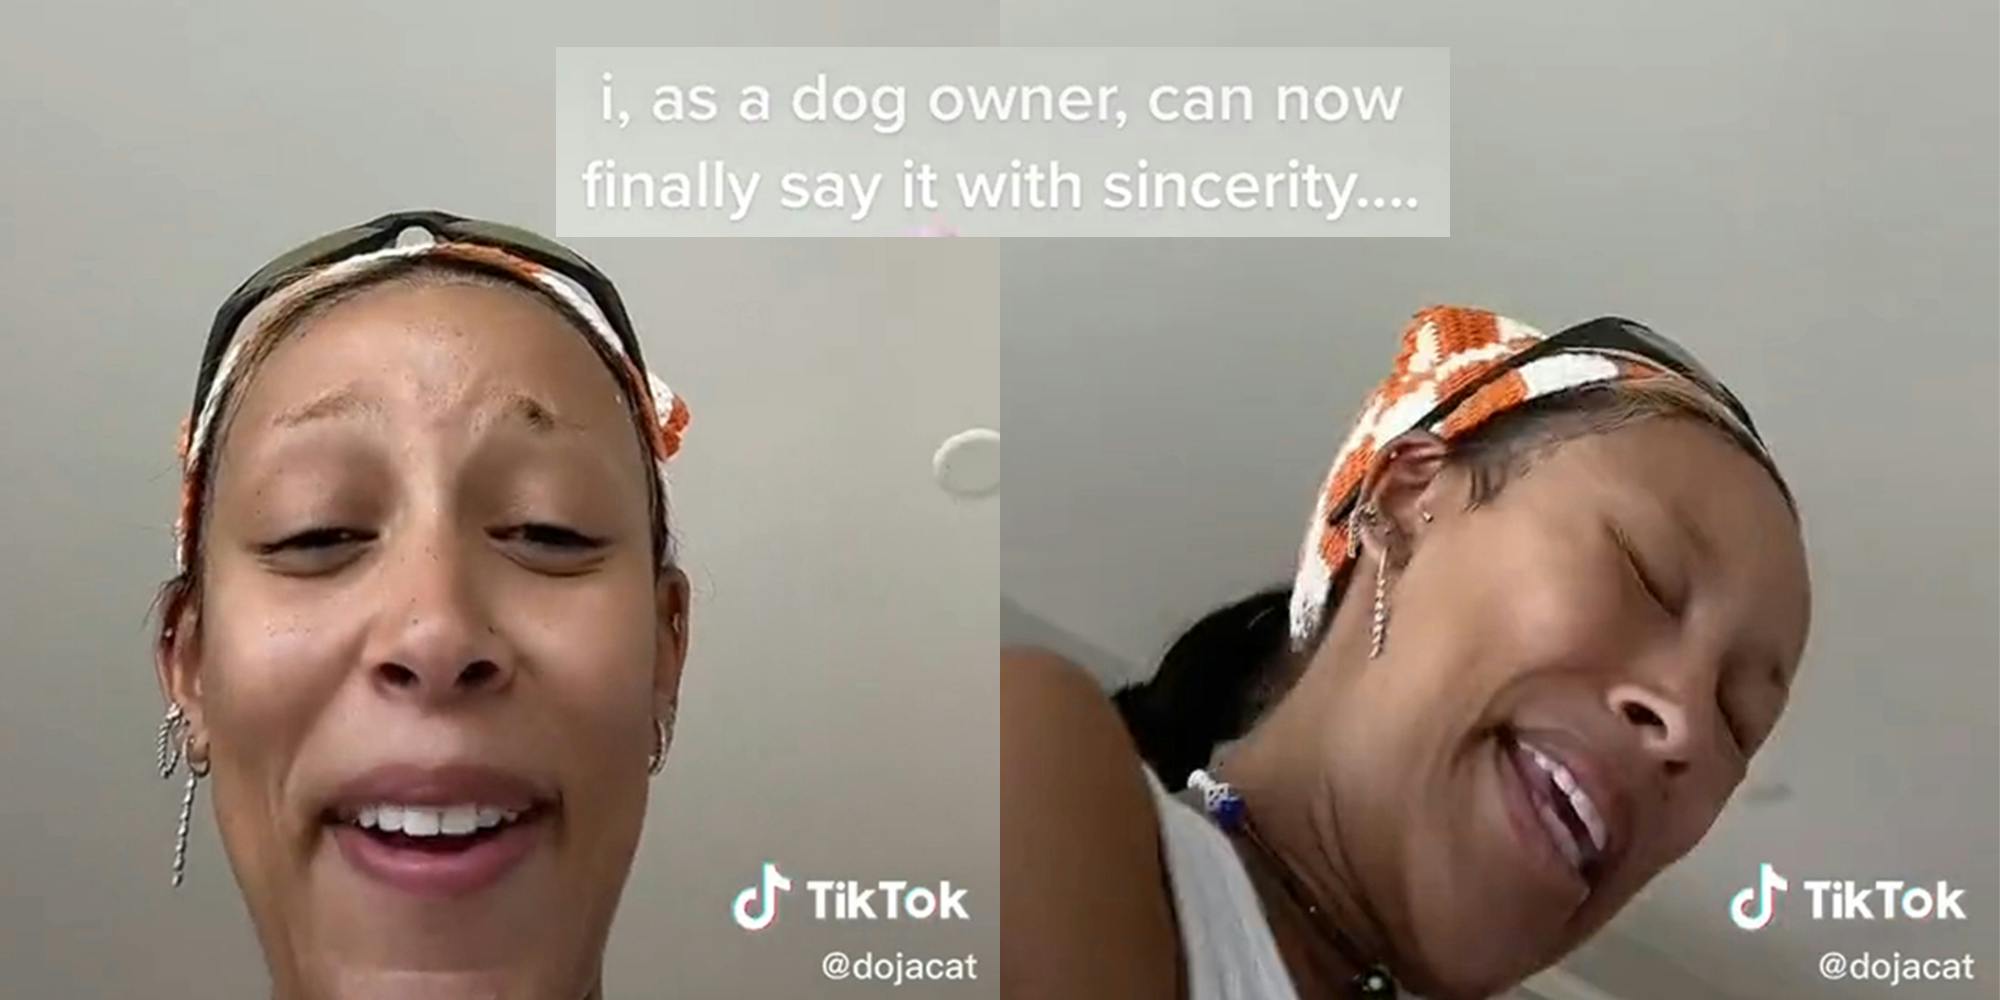 doja cat with caption "i, as a dog owner, can now finally say it with sincerity...."